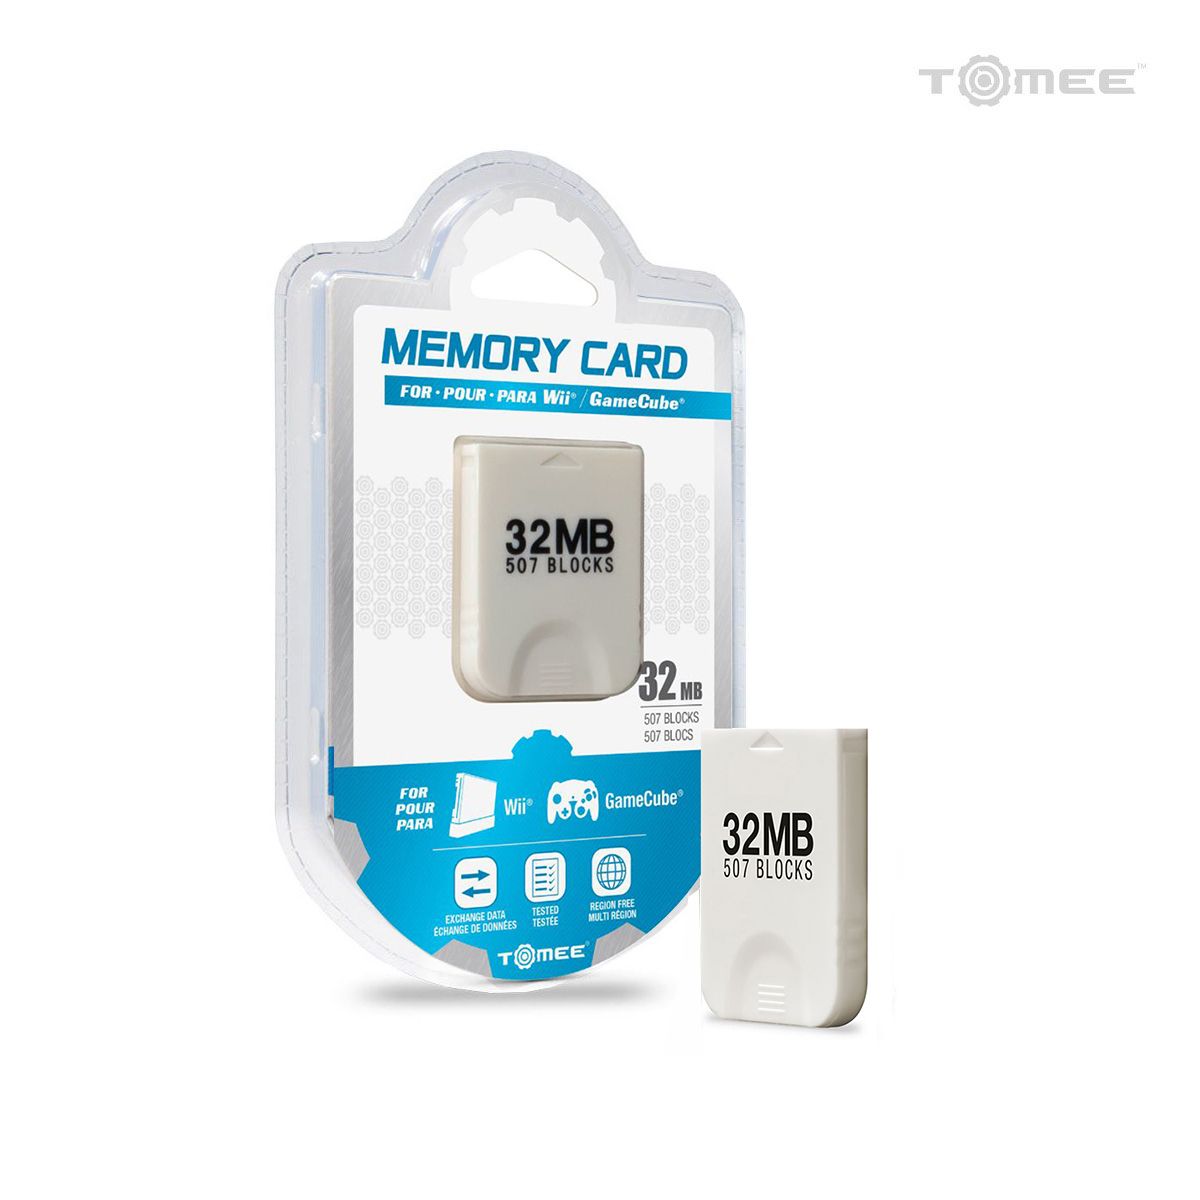 32MB Memory Card Wii/GameCube - Tomee